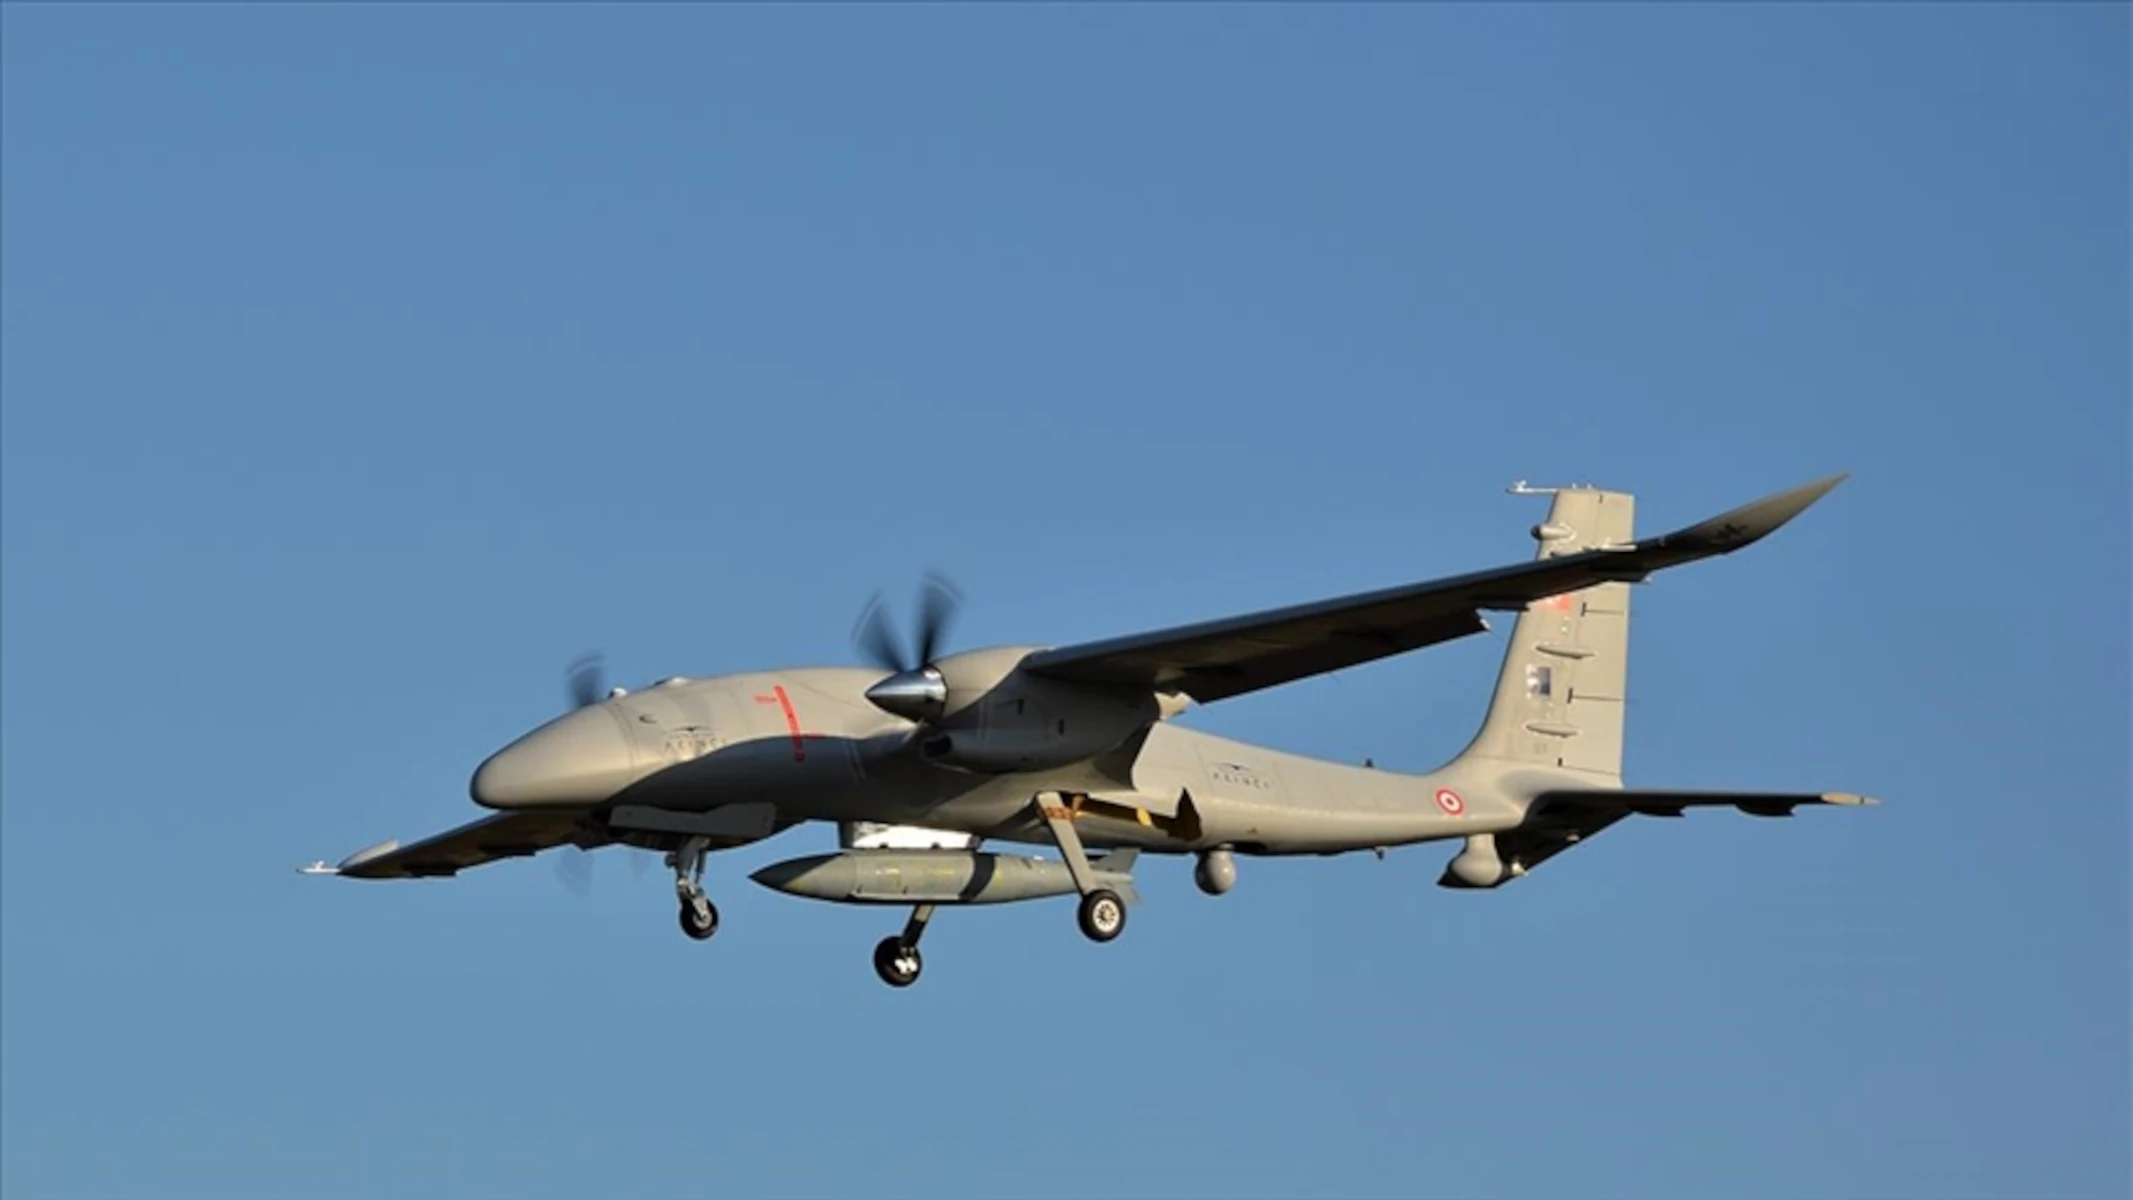 Bayraktar AKINCI strike drone with Ukrainian engine participates in international exercises involving NATO elements for the first time